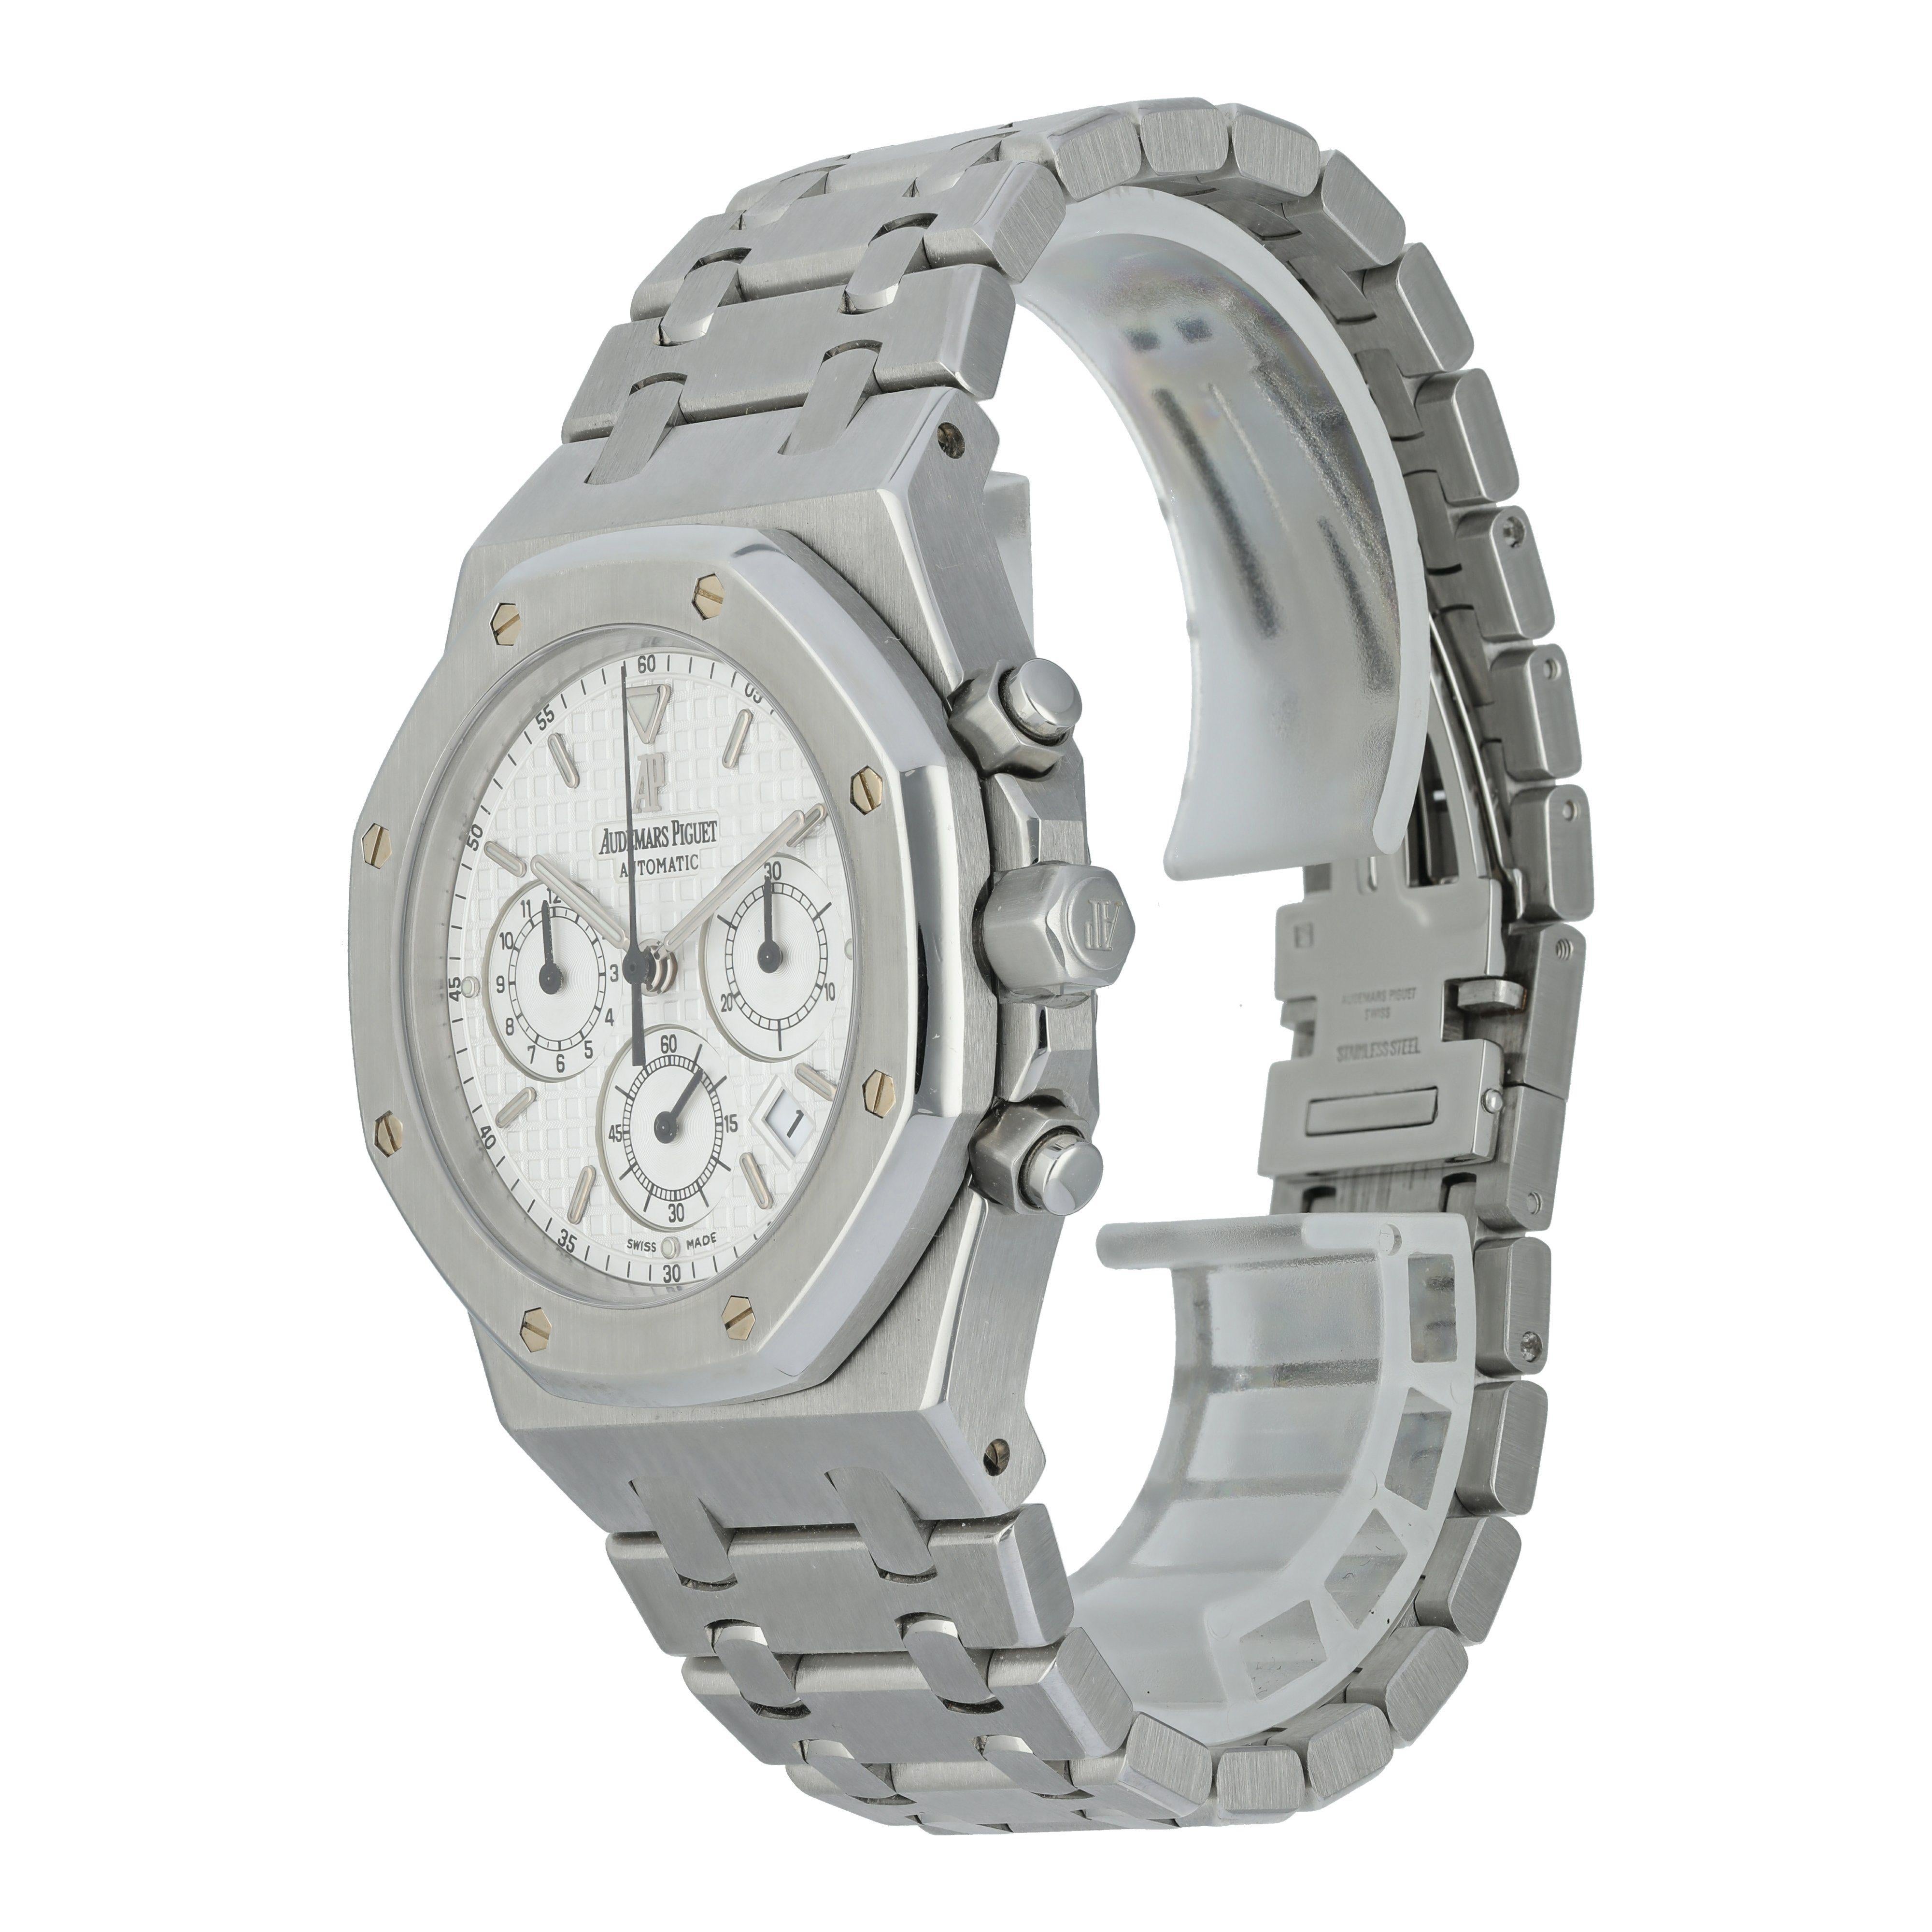 Audemars Piguet Royal Oak 26300ST.OO.1110ST.05 mens Watch.
39mm Stainless Steel case. 
Stainless Steel Stationary bezel. 
Silver dial with Luminous Steel hands and index hour markers. 
Minute markers on the outer dial. 
Date display at the 3 o'clock